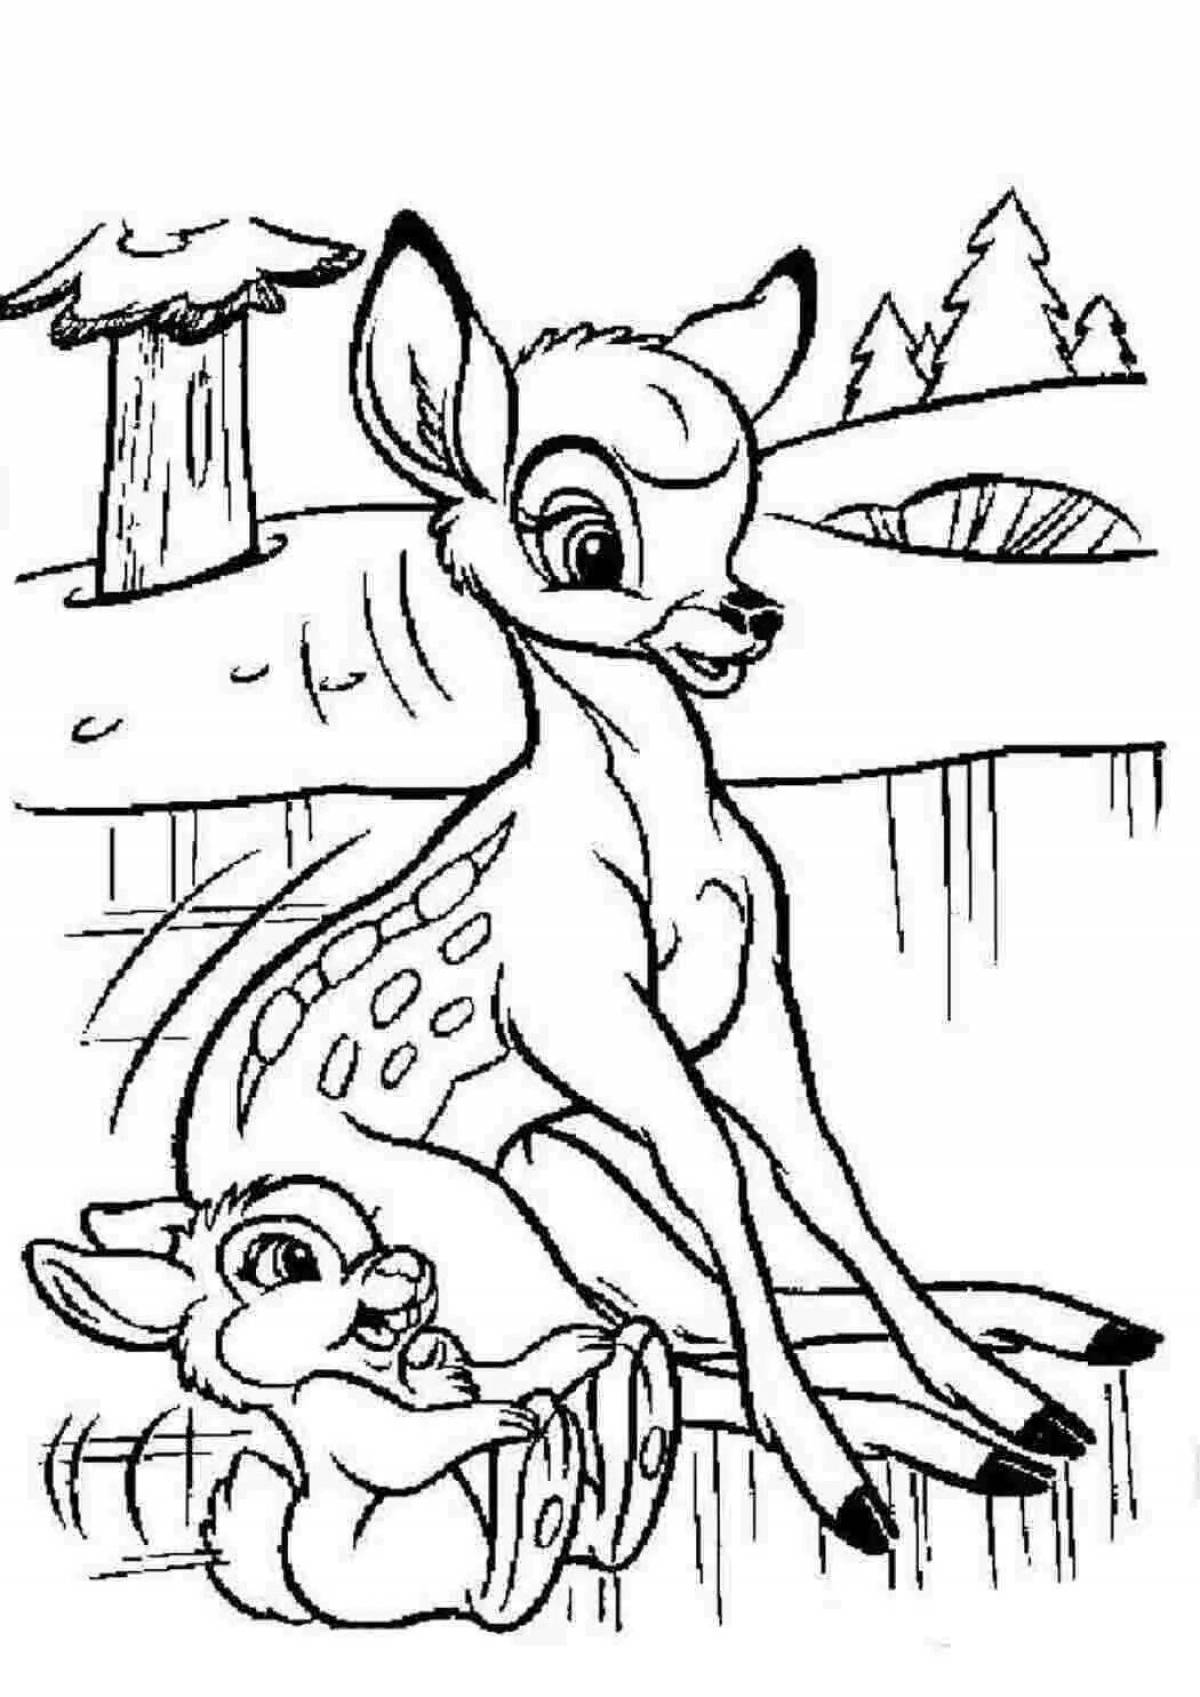 Exciting bambi coloring book for kids